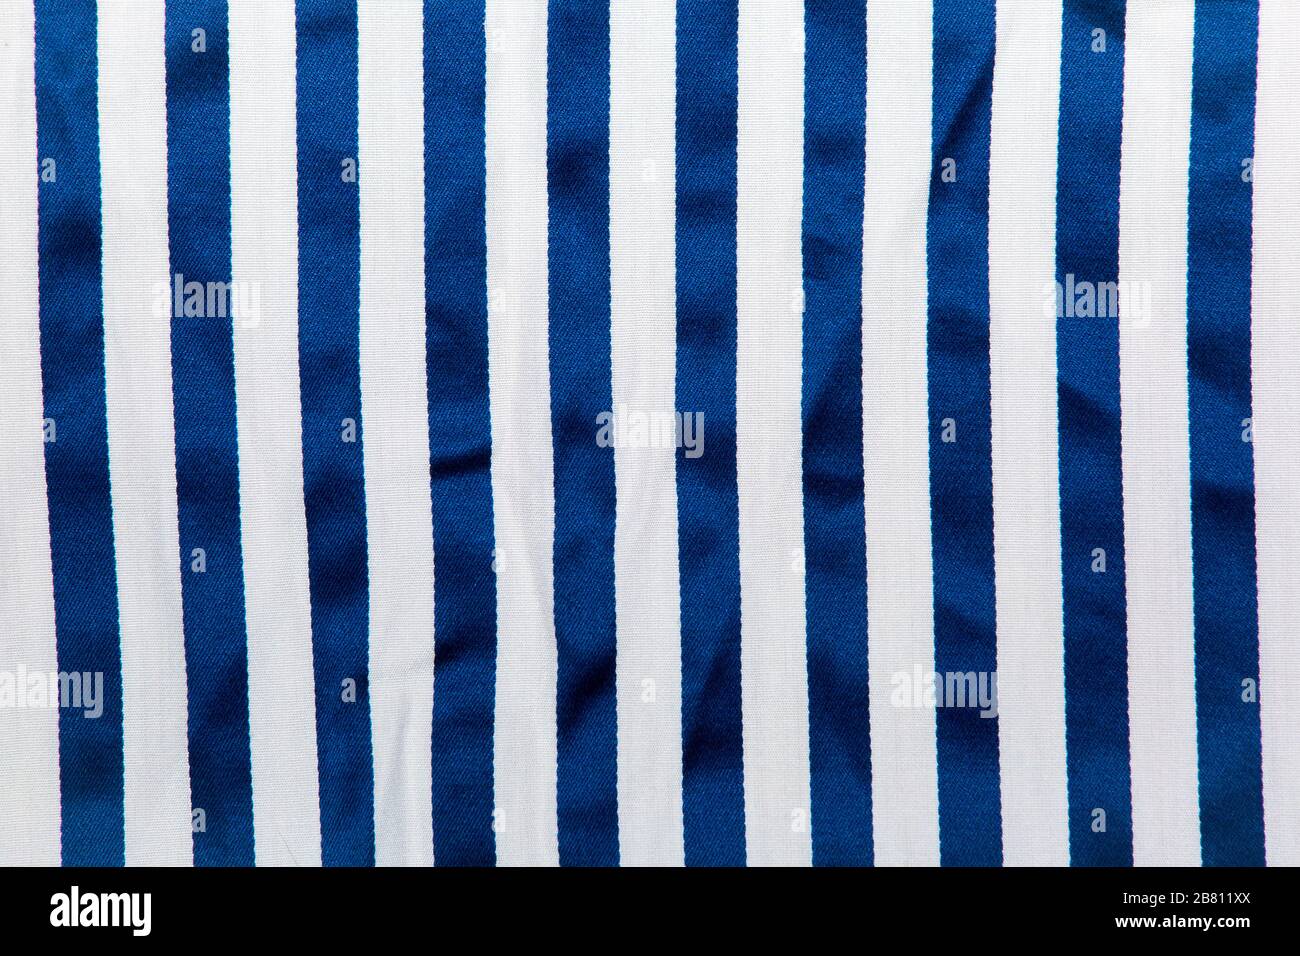 image of a blue and white striped pattern on fabric Stock Photo